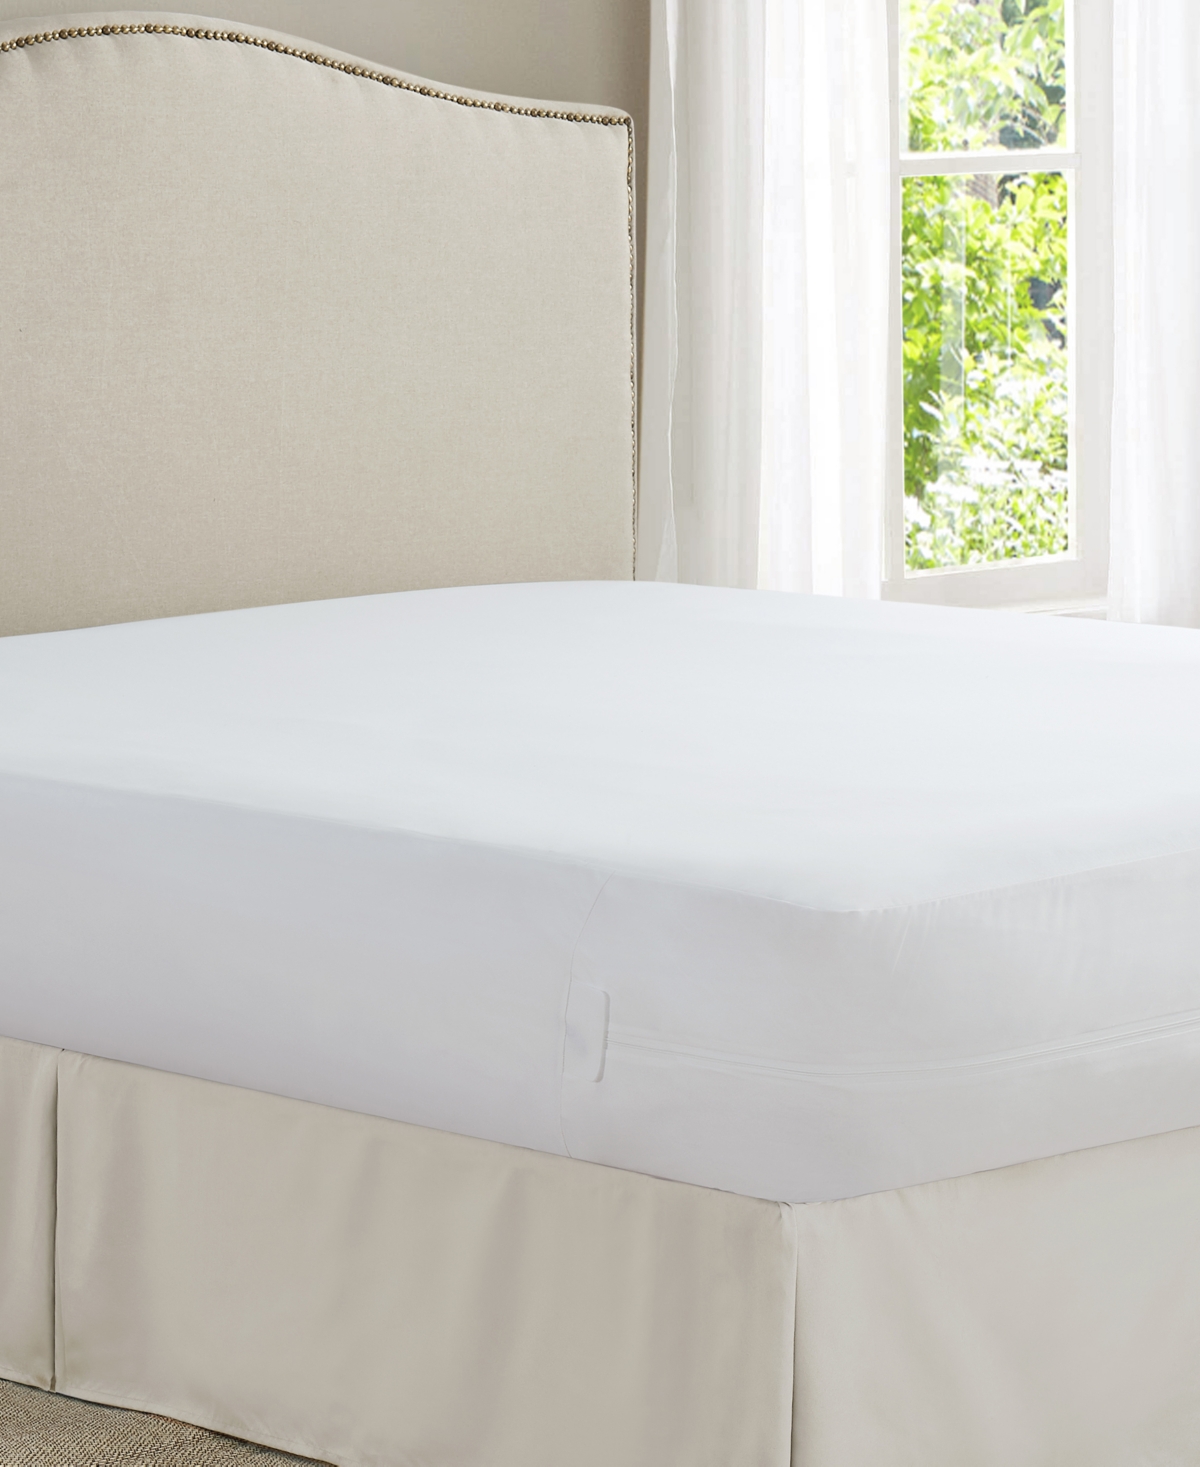 All-In-One Cool Bamboo Twin Xl Mattress Protector with Bed Bug Blocker